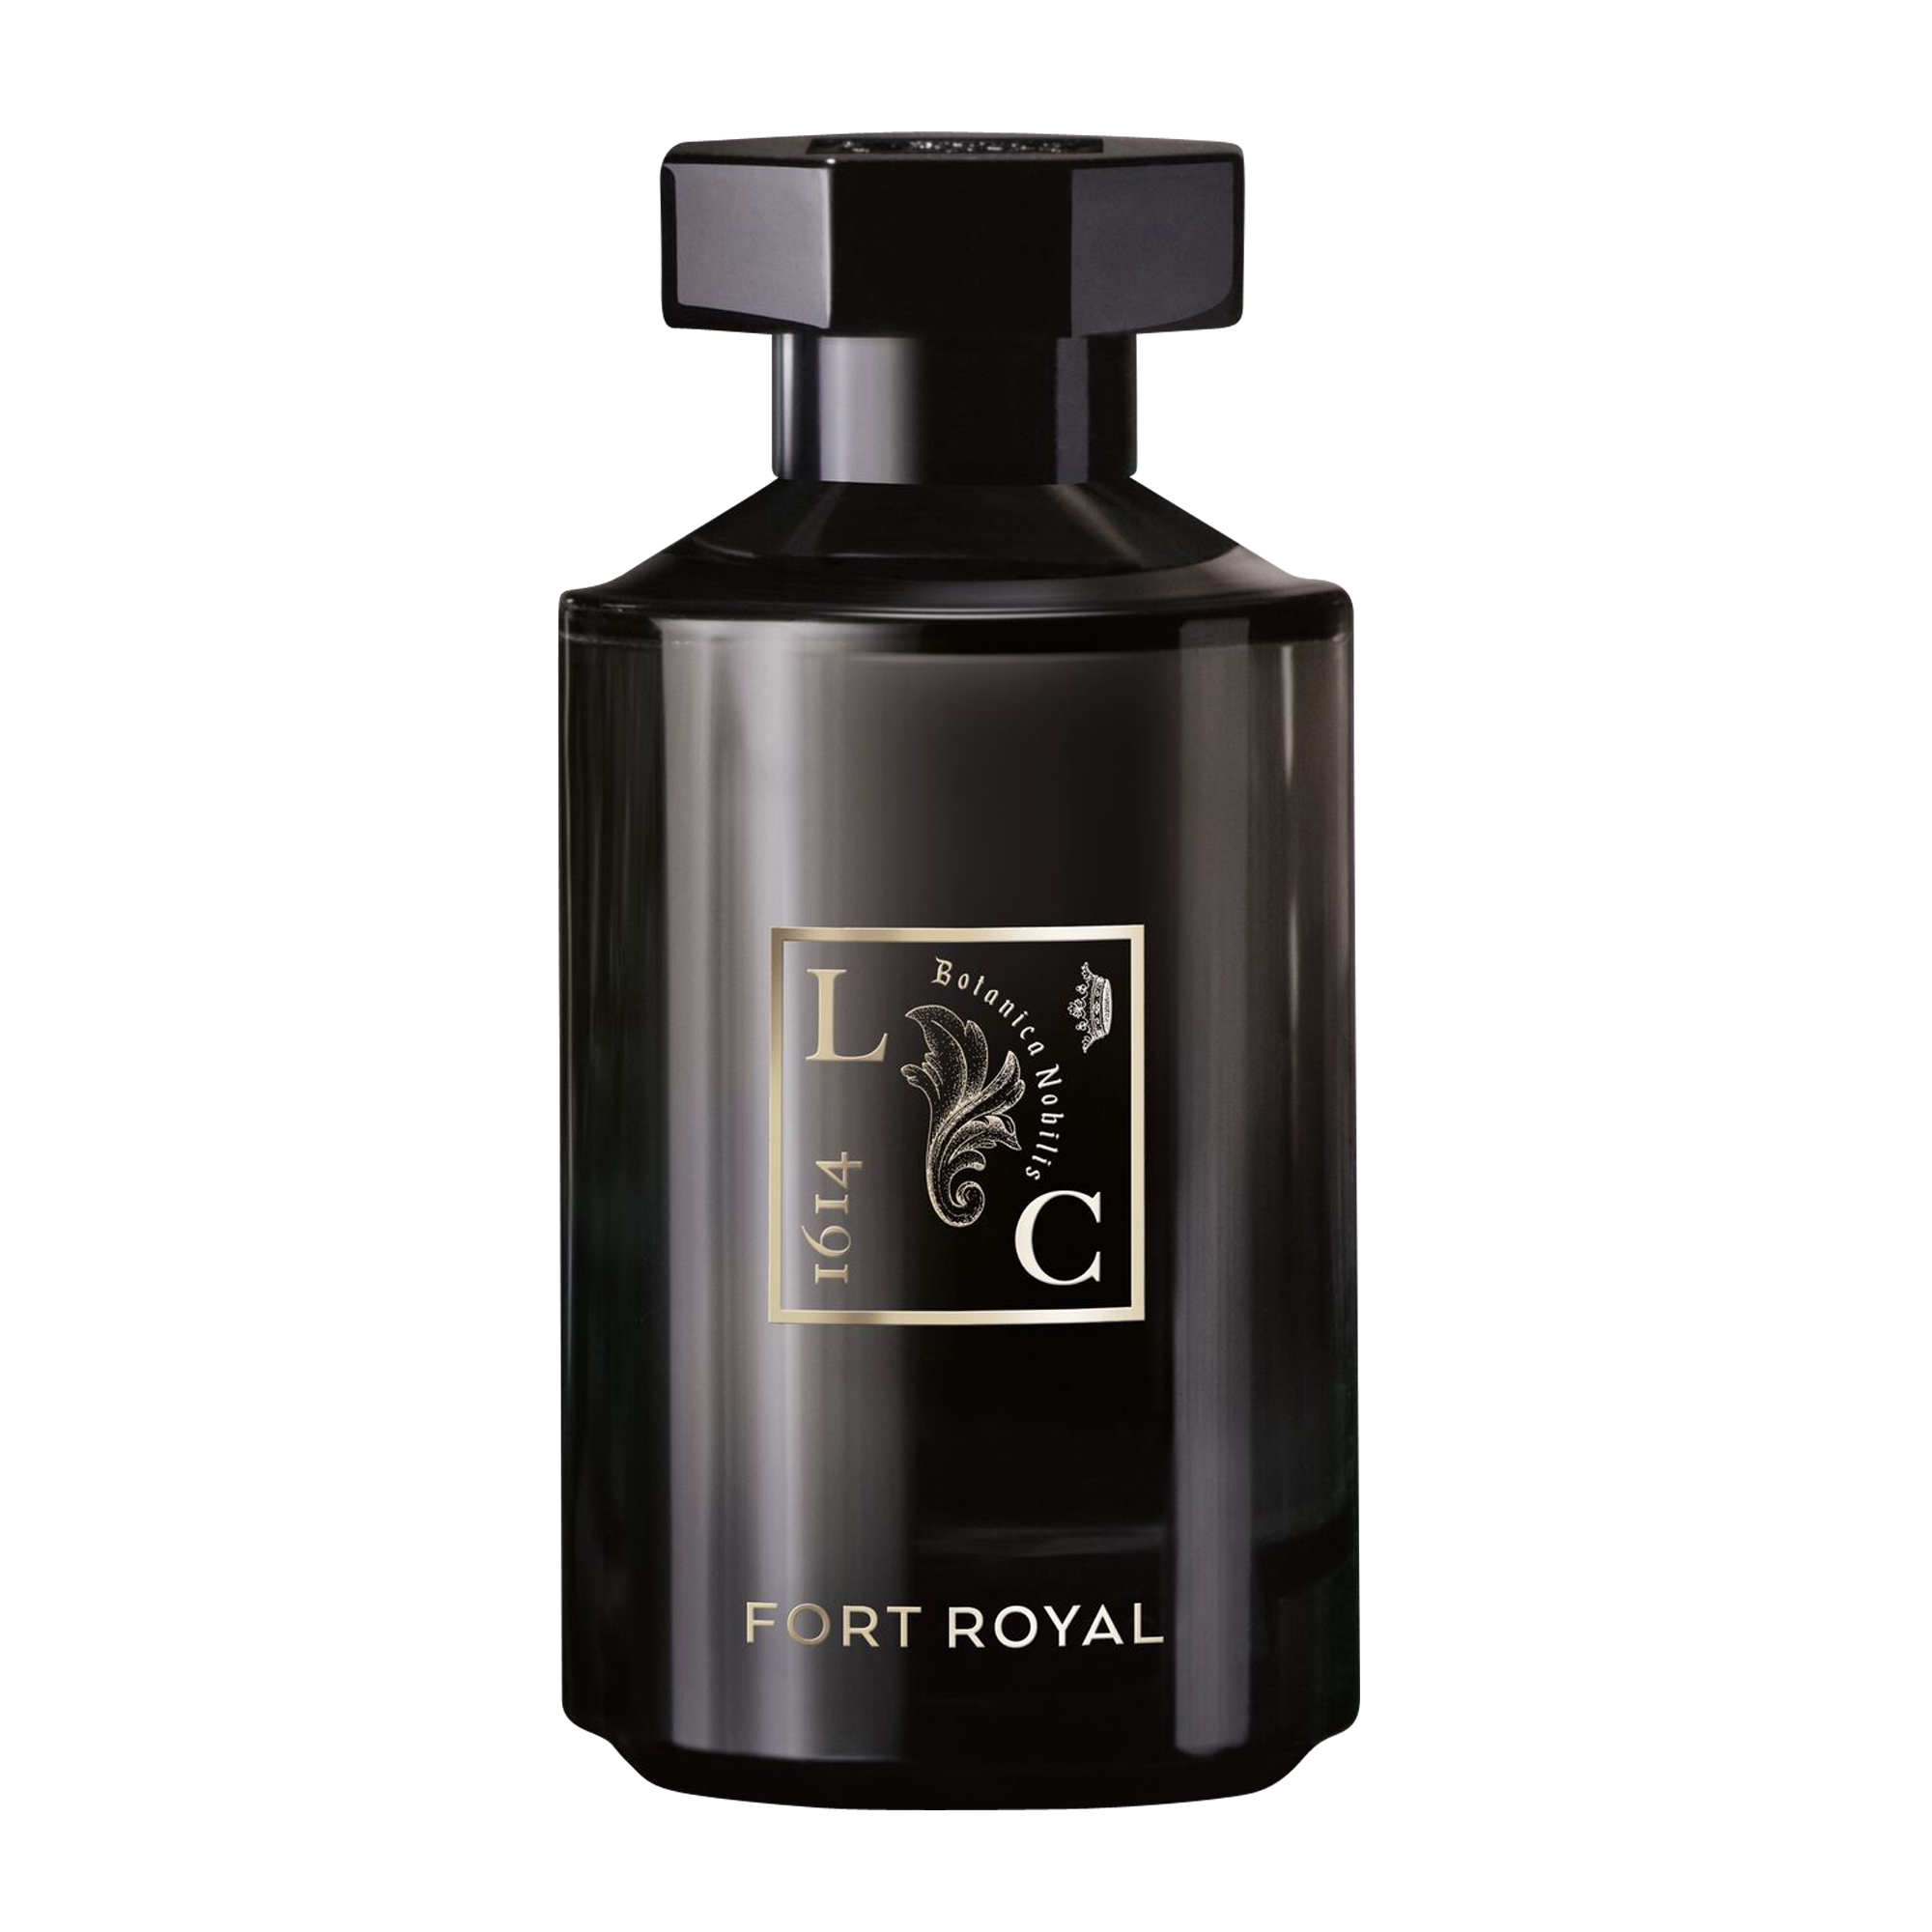 Le Couvent - Remarkable Perfume Fort Royal EDP 50 ml